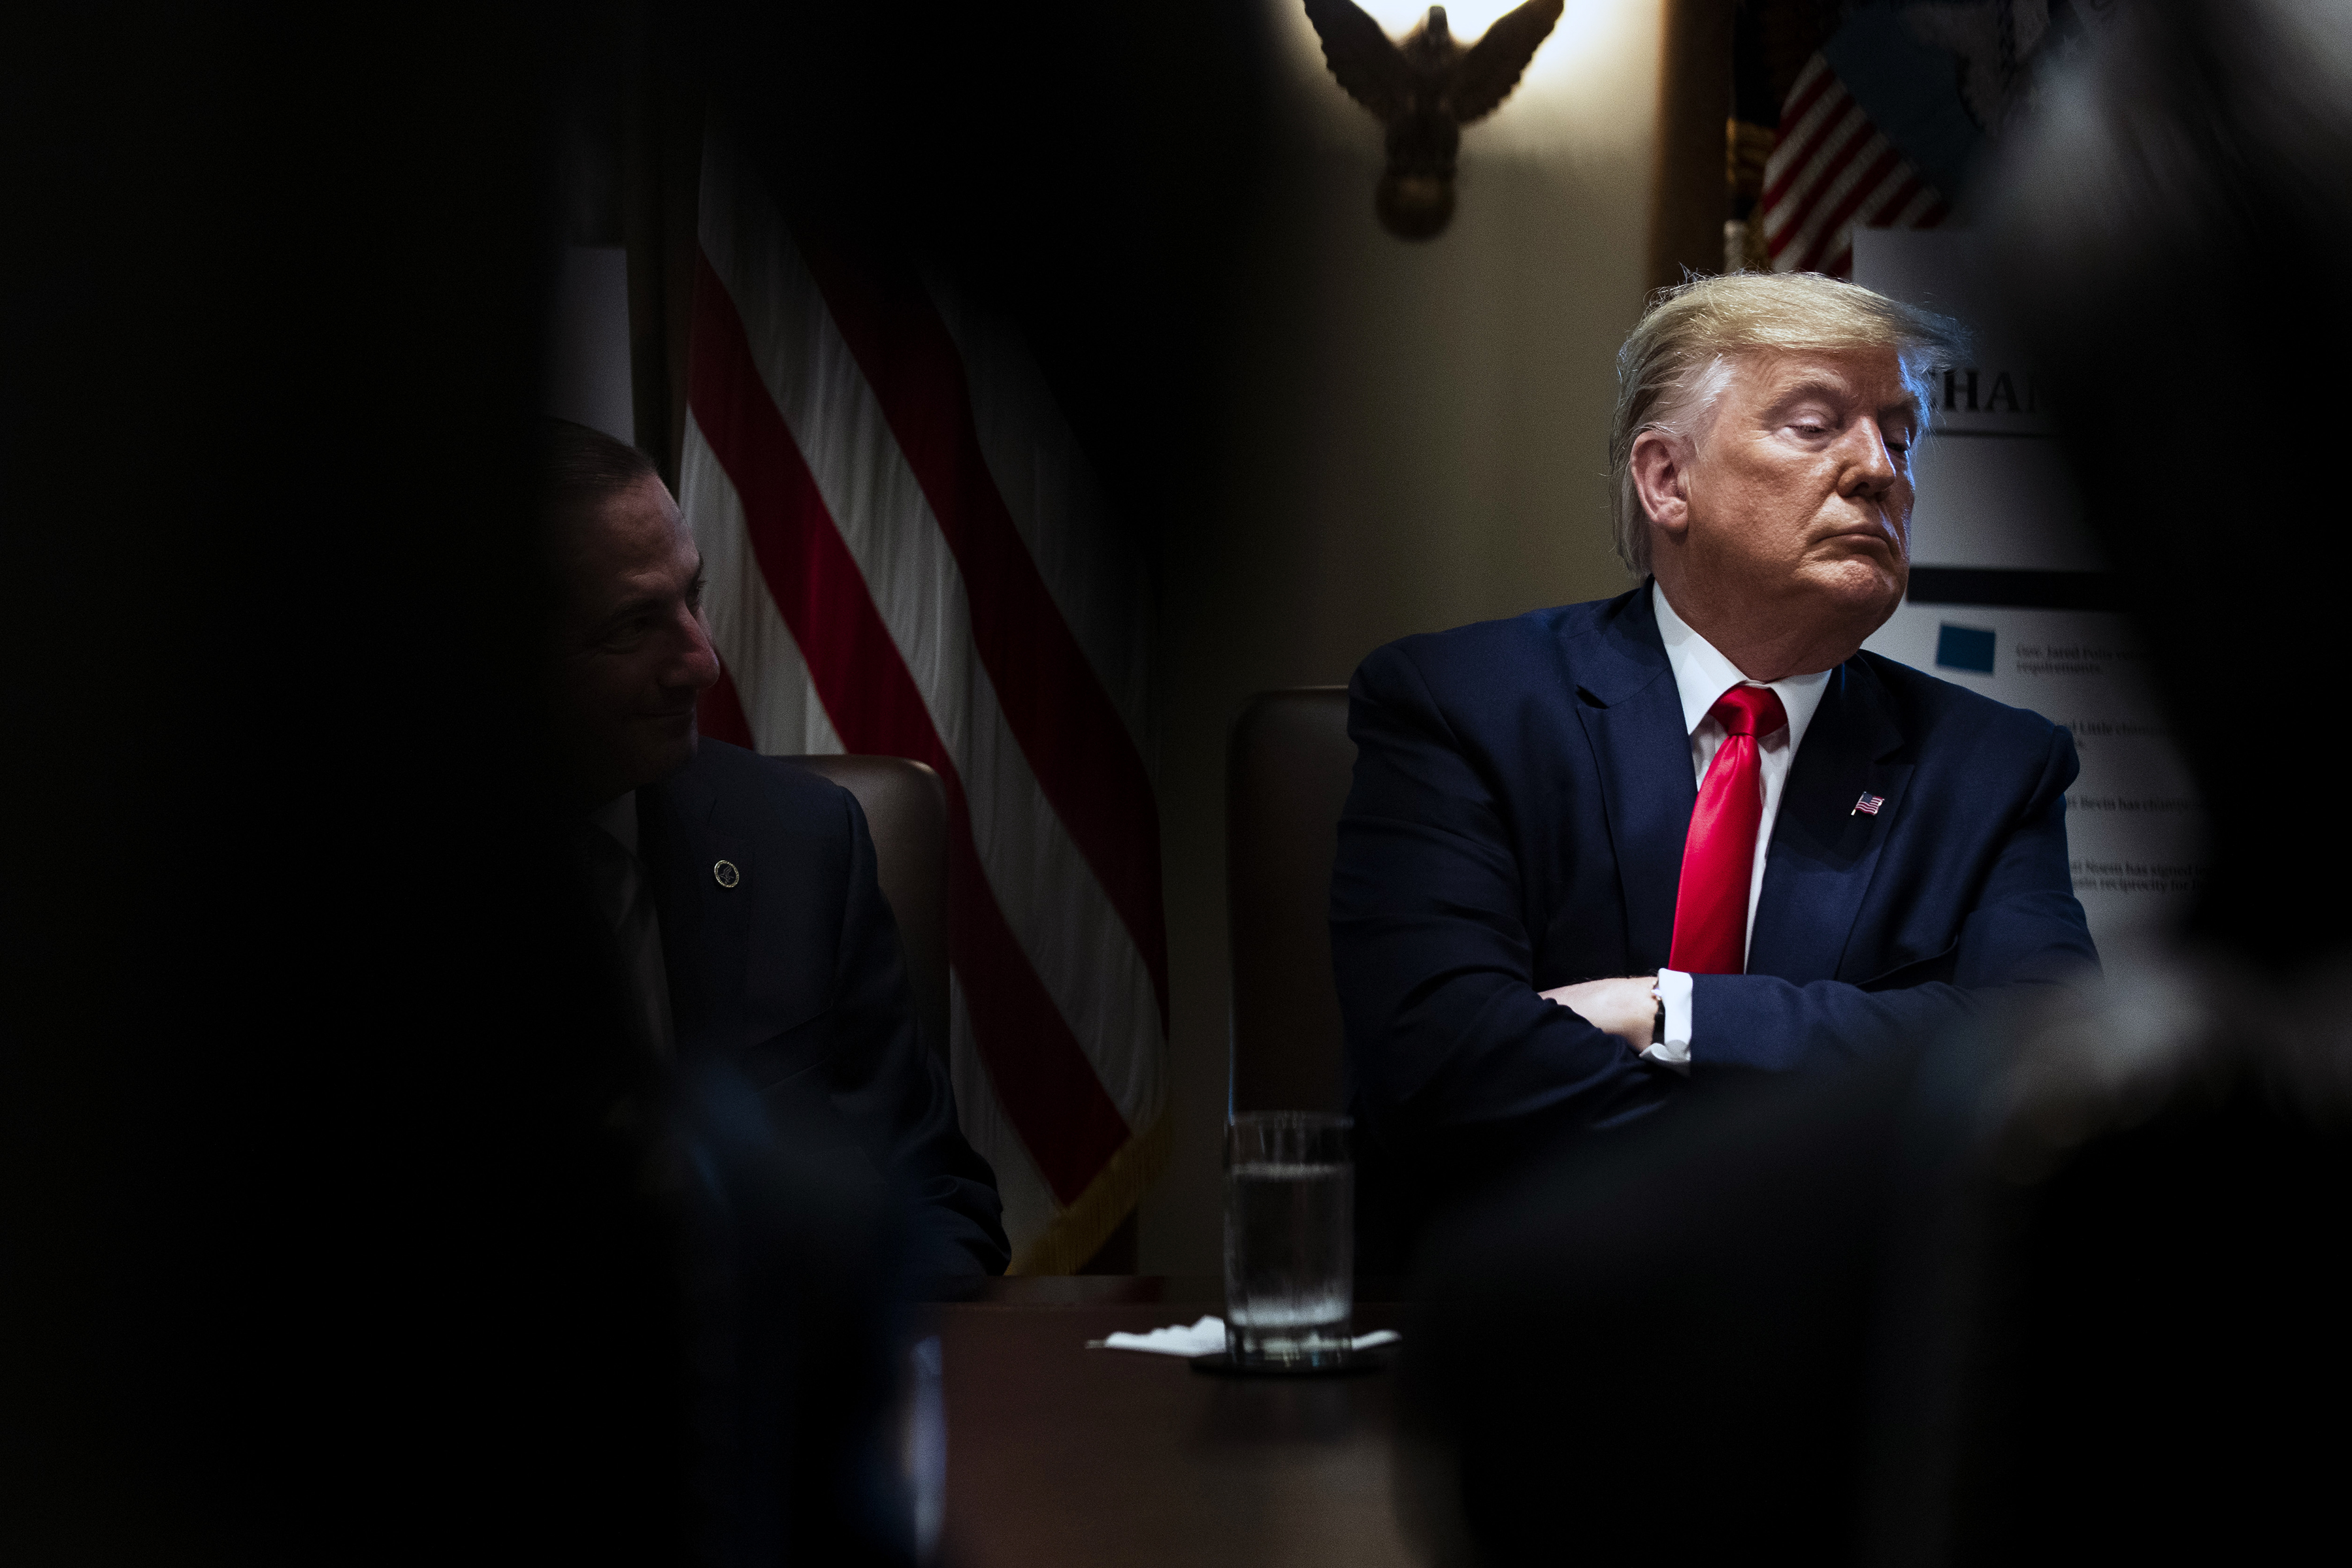 US President Donald Trump speaks to reporters during a cabinet meeting at the White House in Washington on Monday, October 21, 2019.